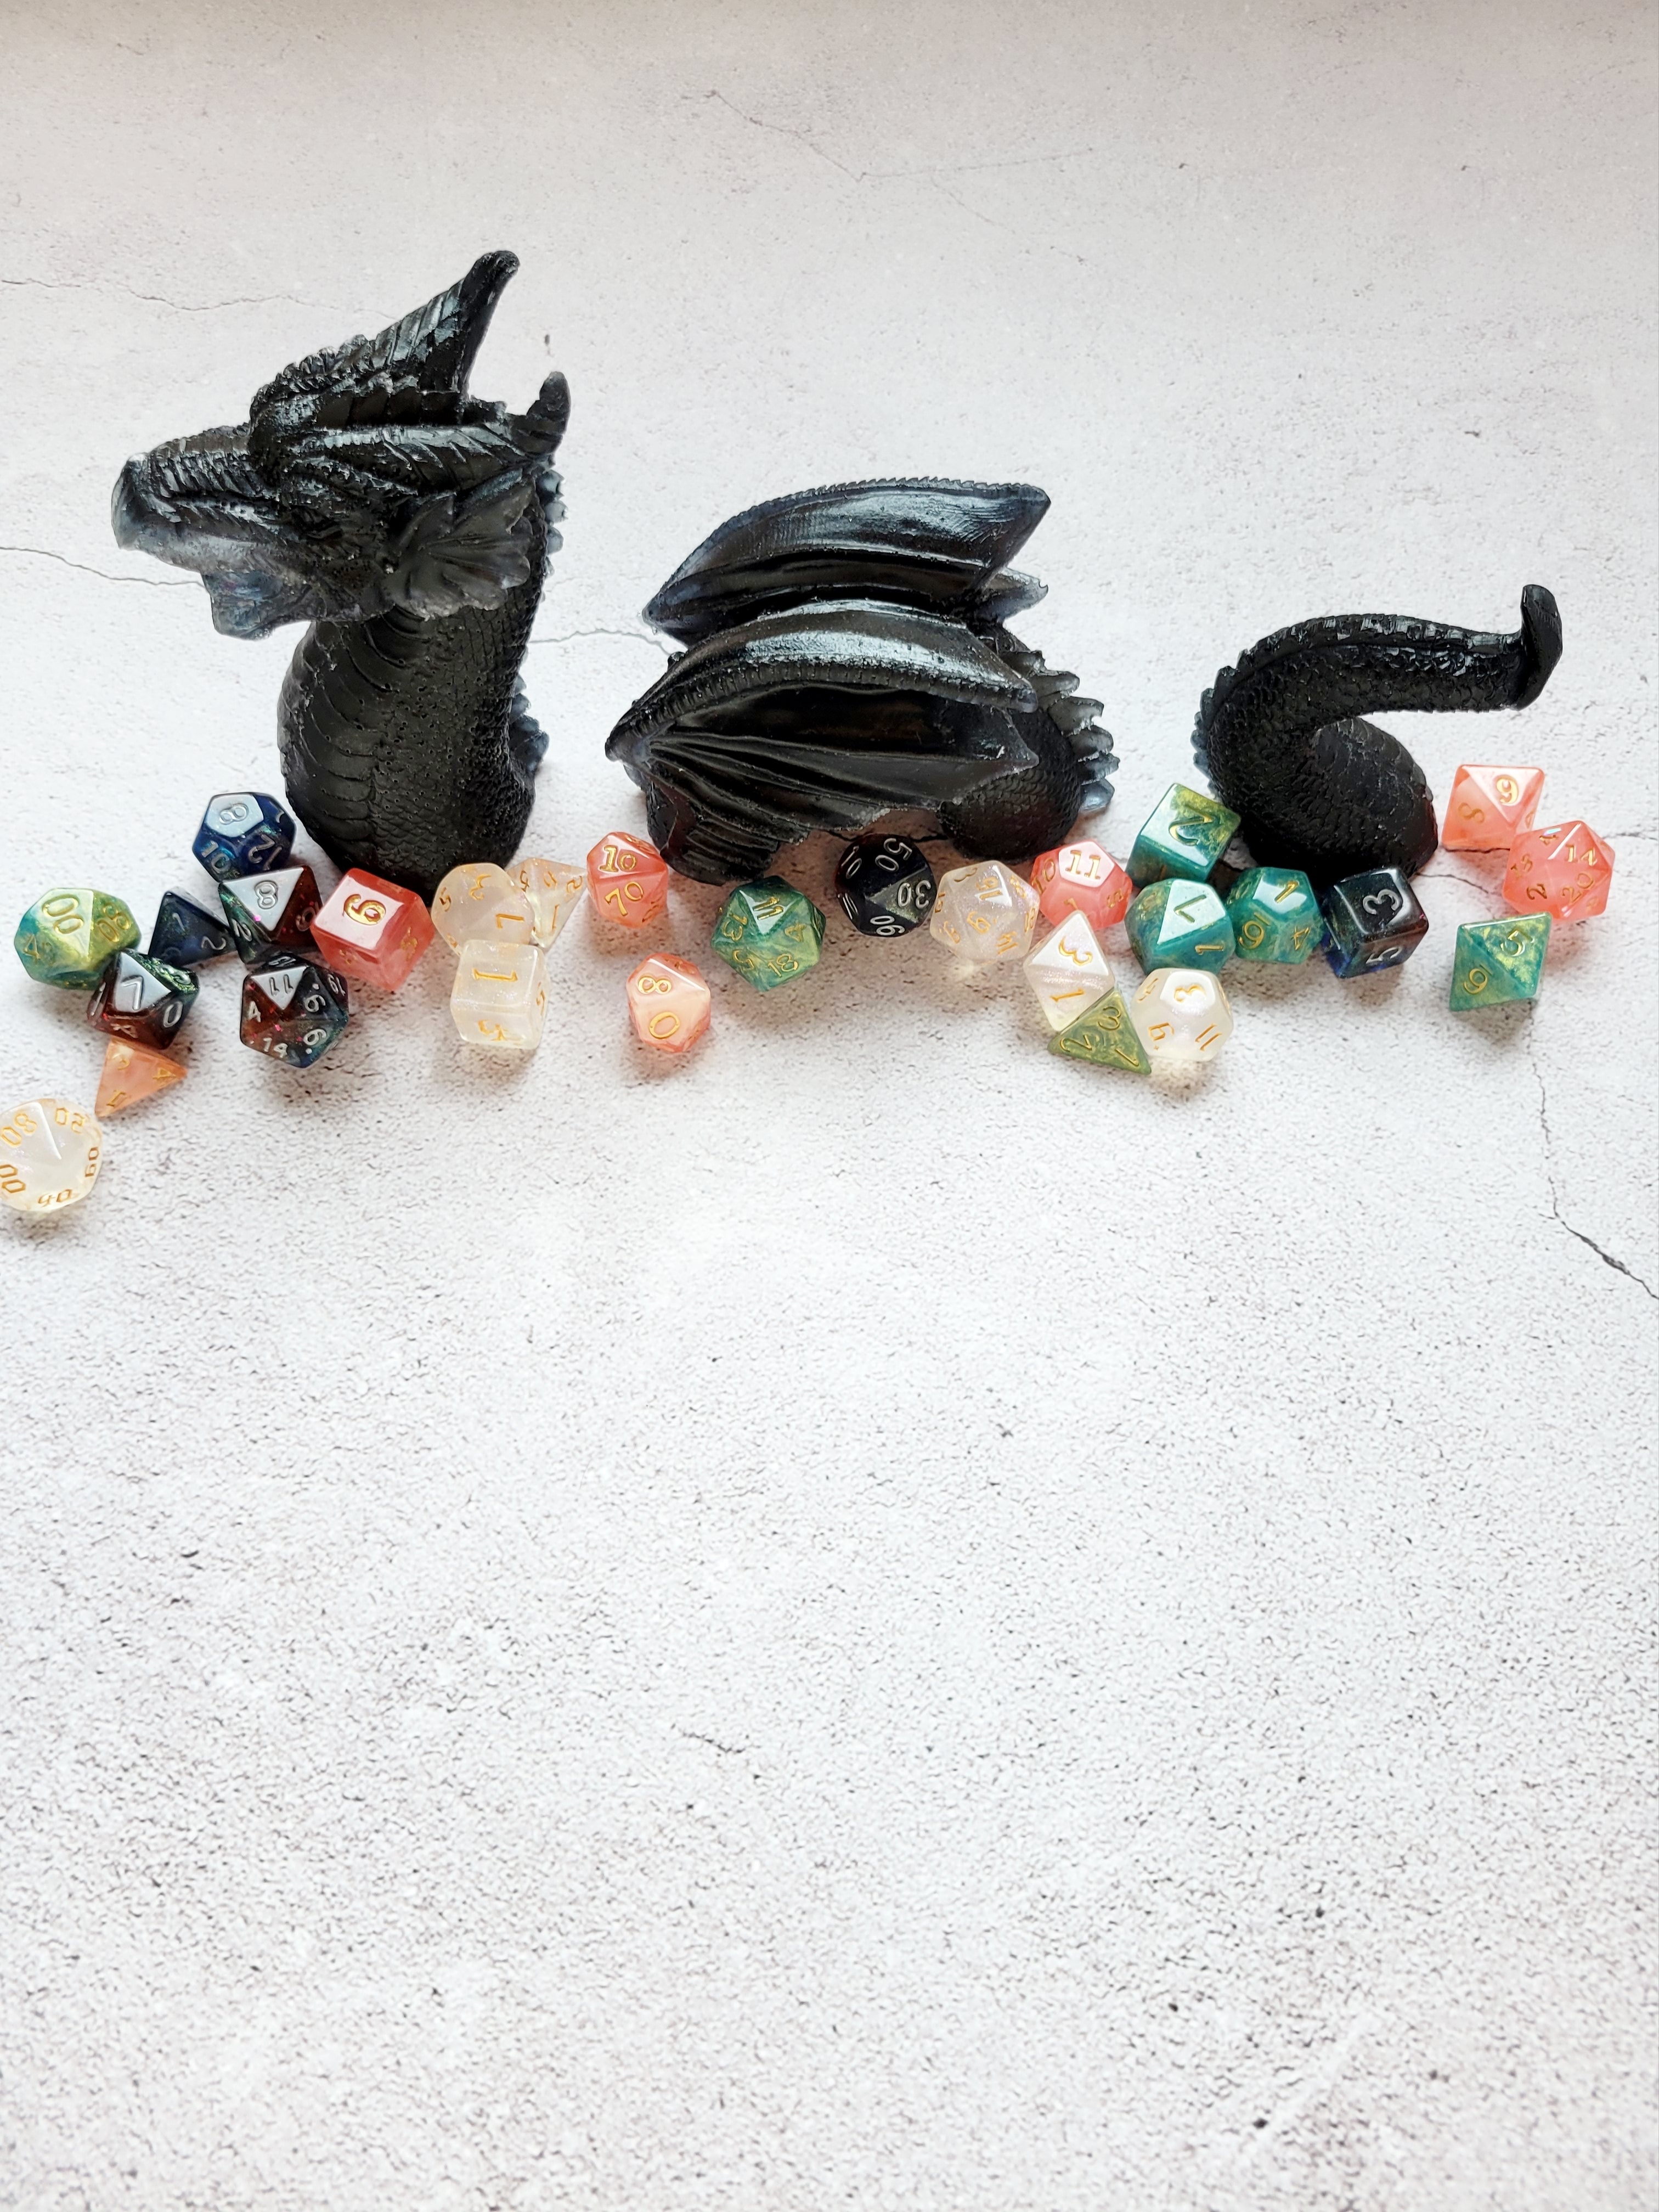 three piece resin sea serpent - Head, winged body, curved tail are all black. Front view surrounded by dice